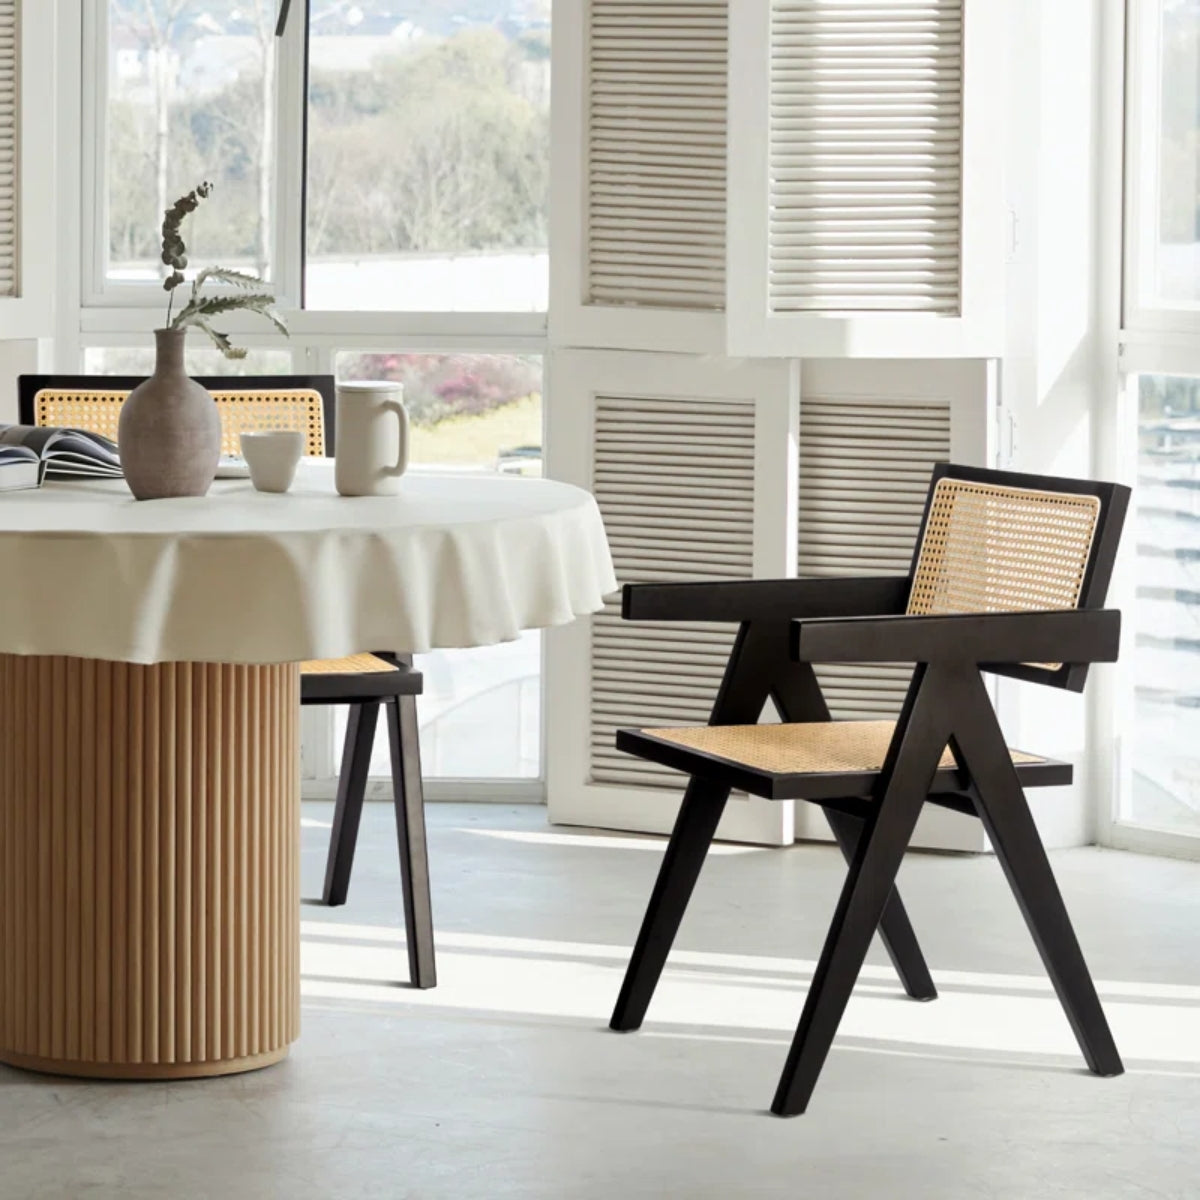 replica jeanneret armchair rattan and solid wood with table